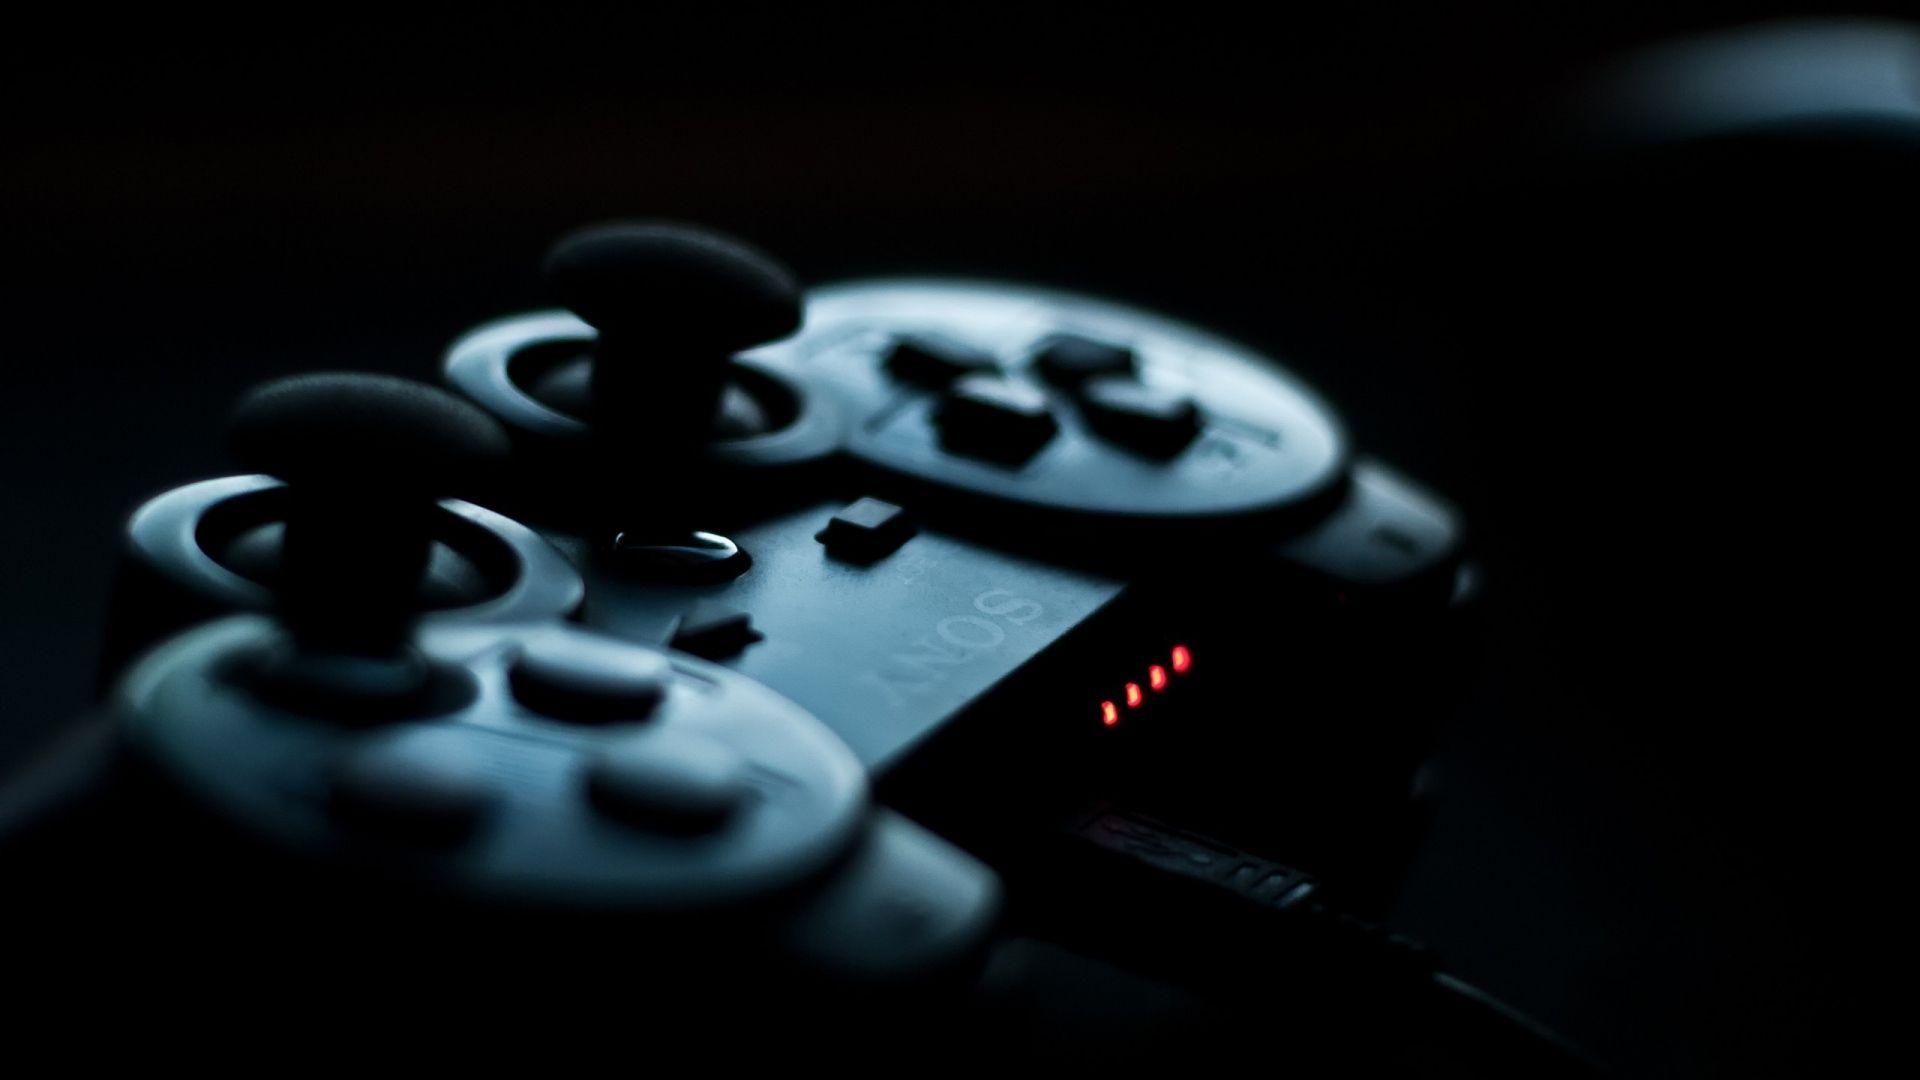 Download Wallpaper 1920x1080 joystick, sony, playstation, game Full